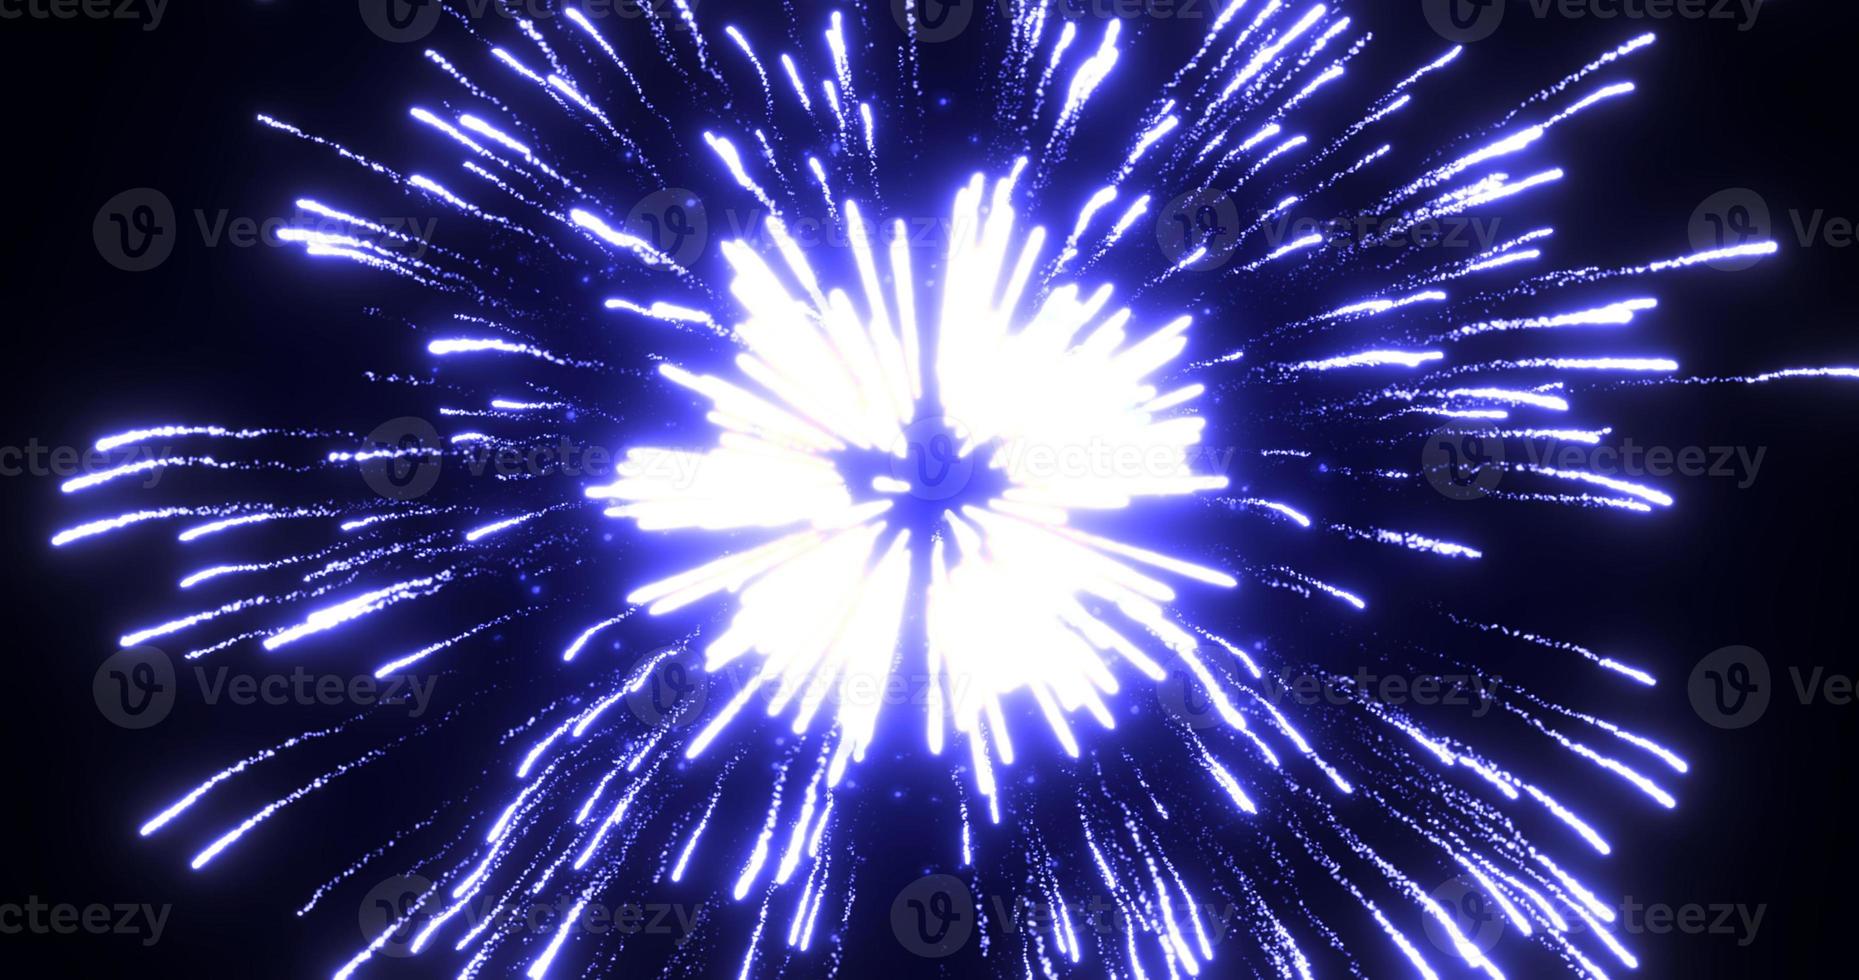 Abstract background of bright blue glowing shiny bright beautiful festive fireworks salute photo